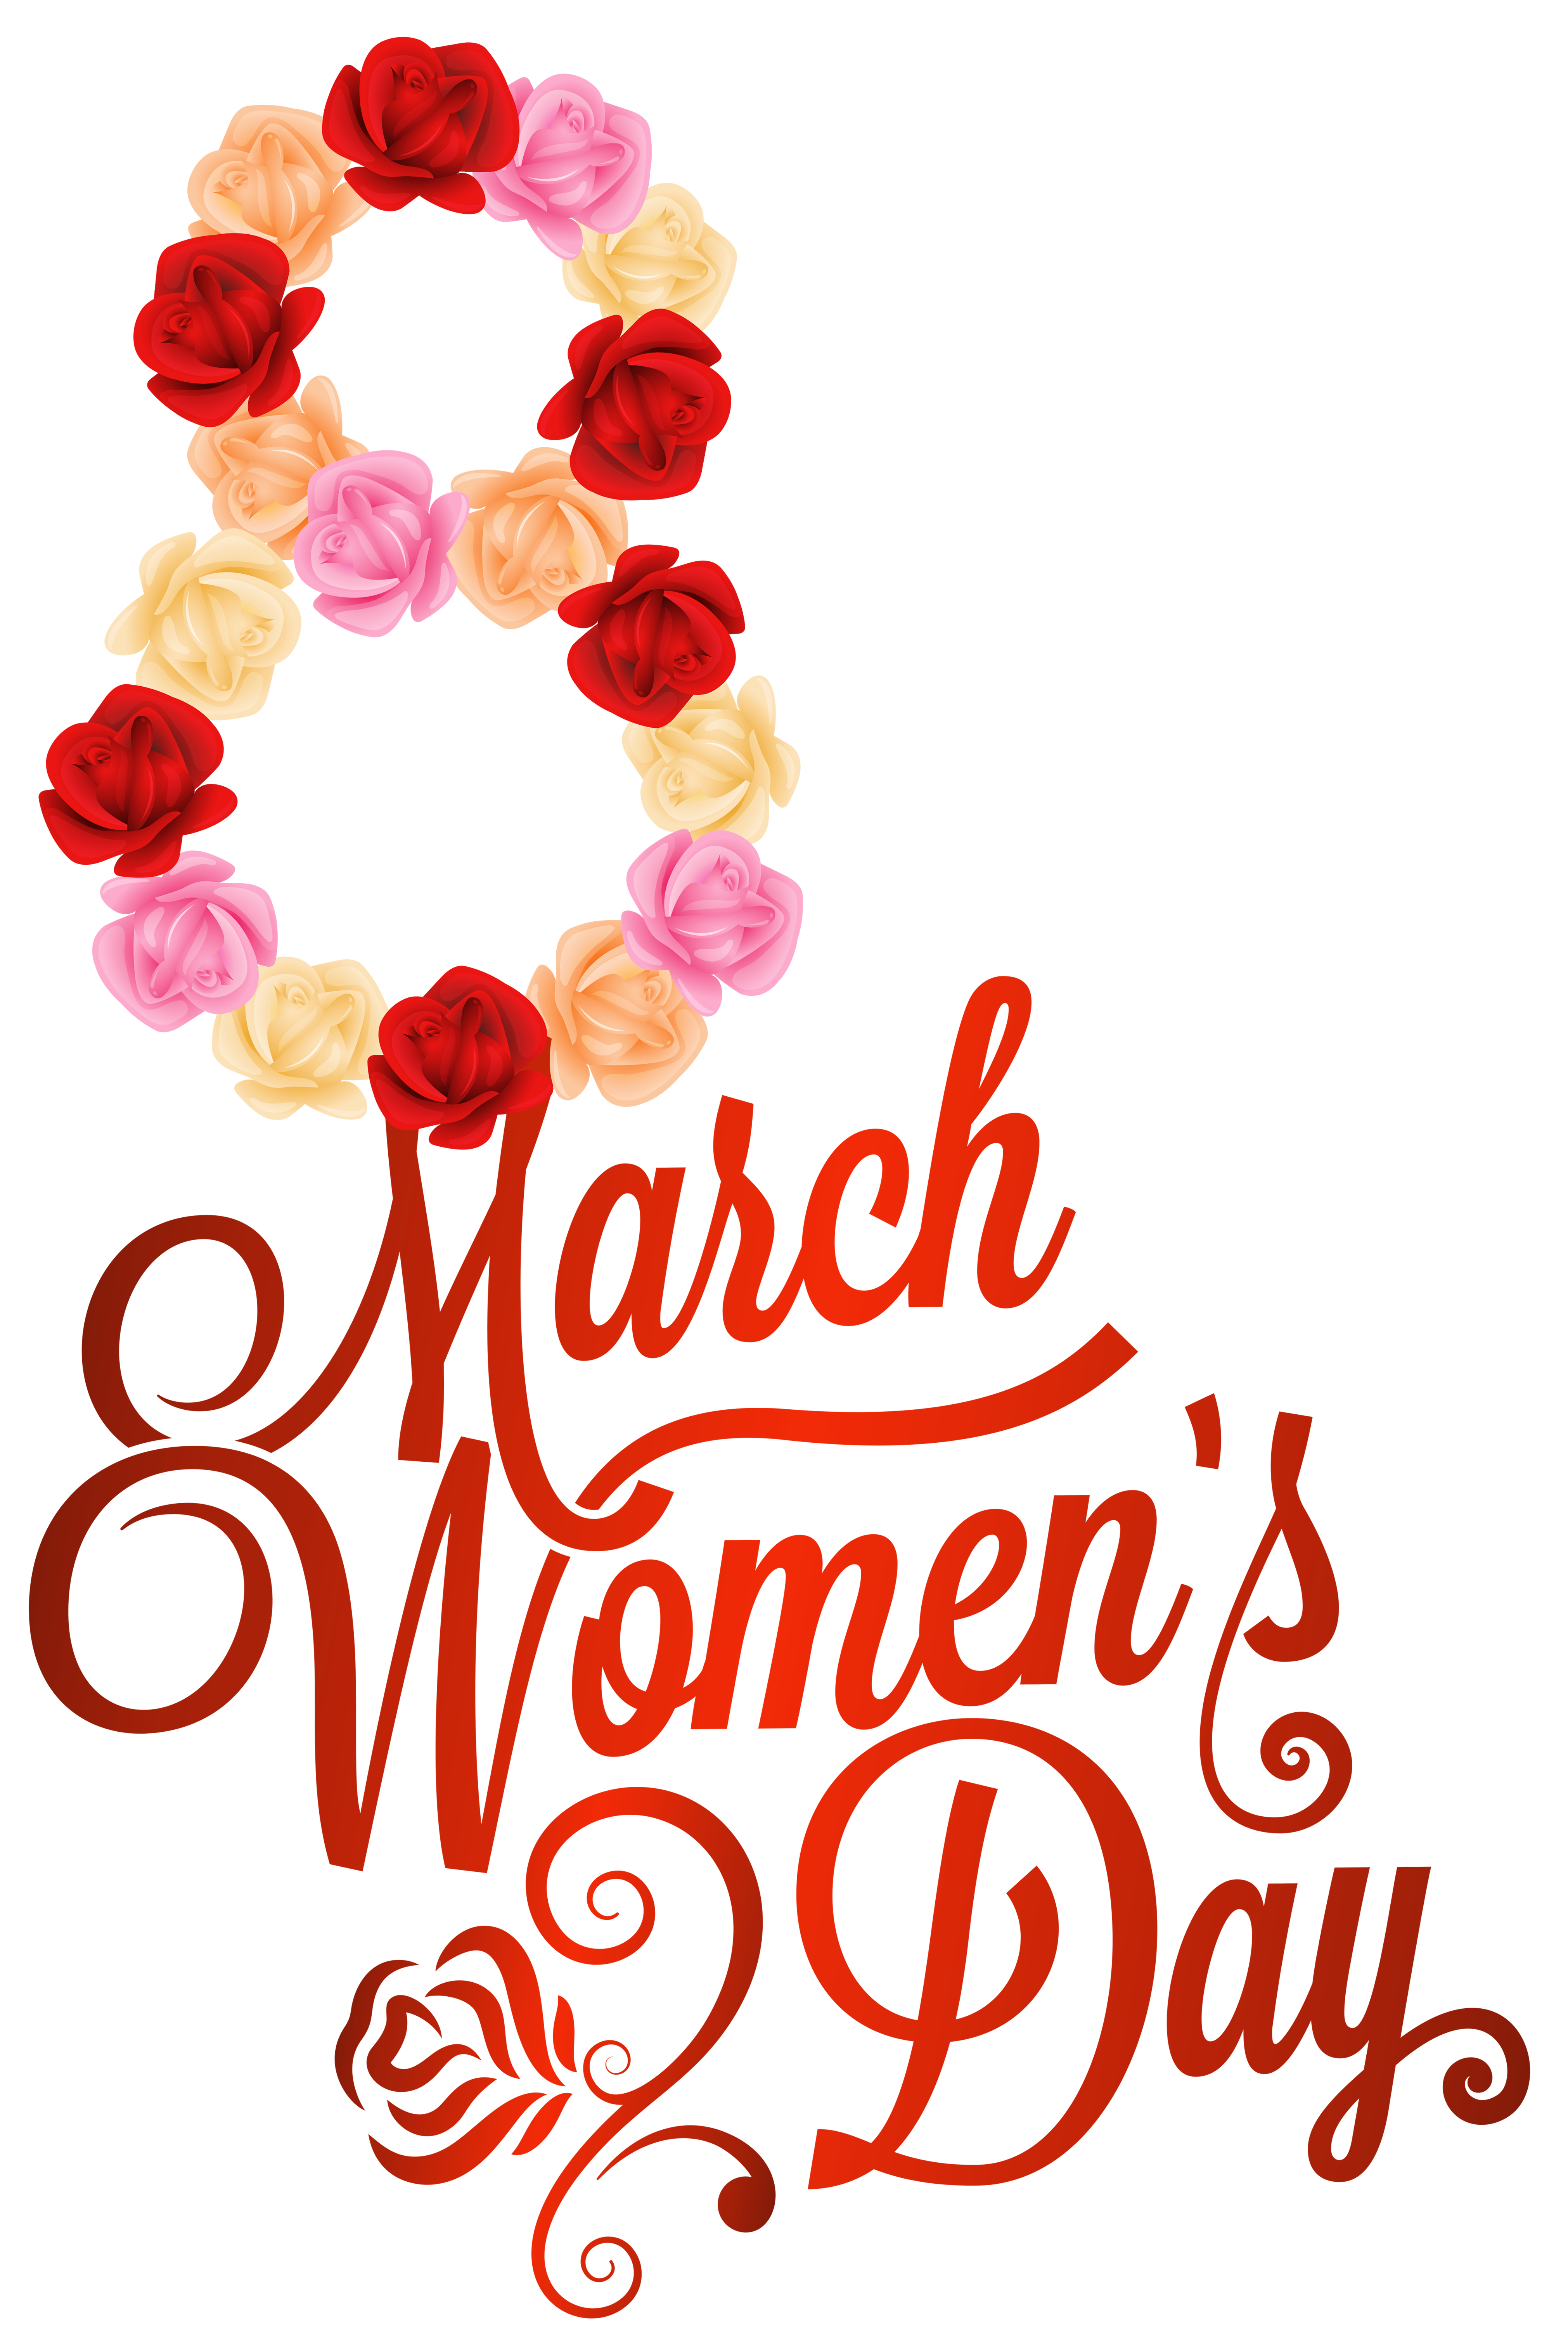 Red 8 March Womens Day PNG Clipart Image